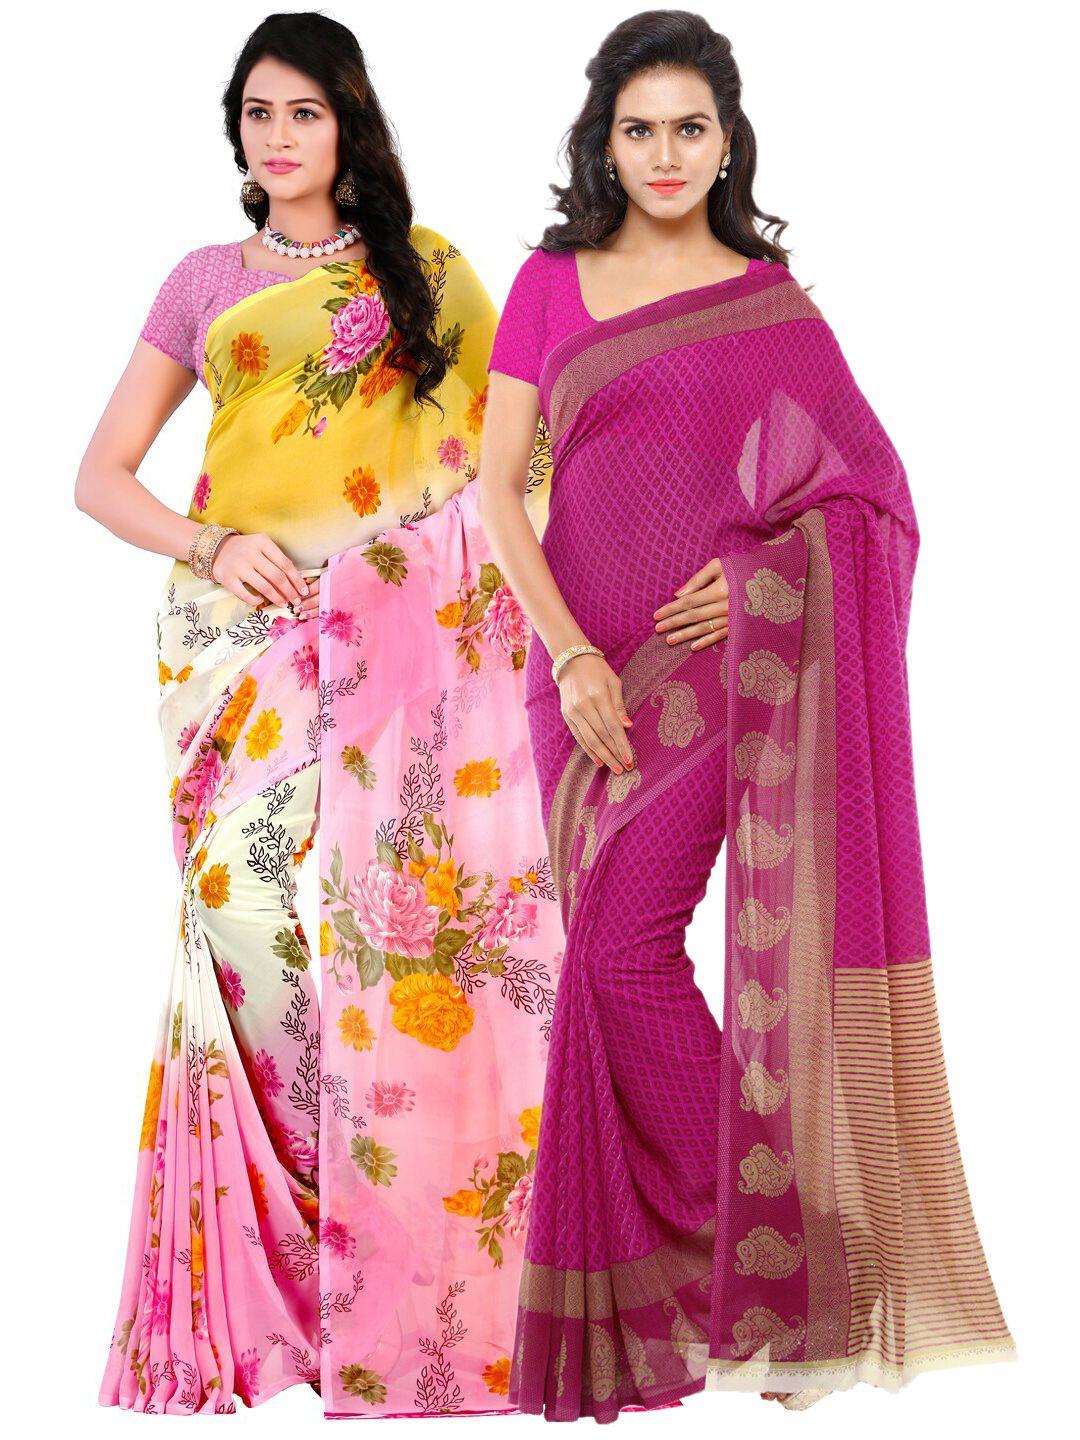 kalini pack of 2 purple & pink floral poly georgette sarees